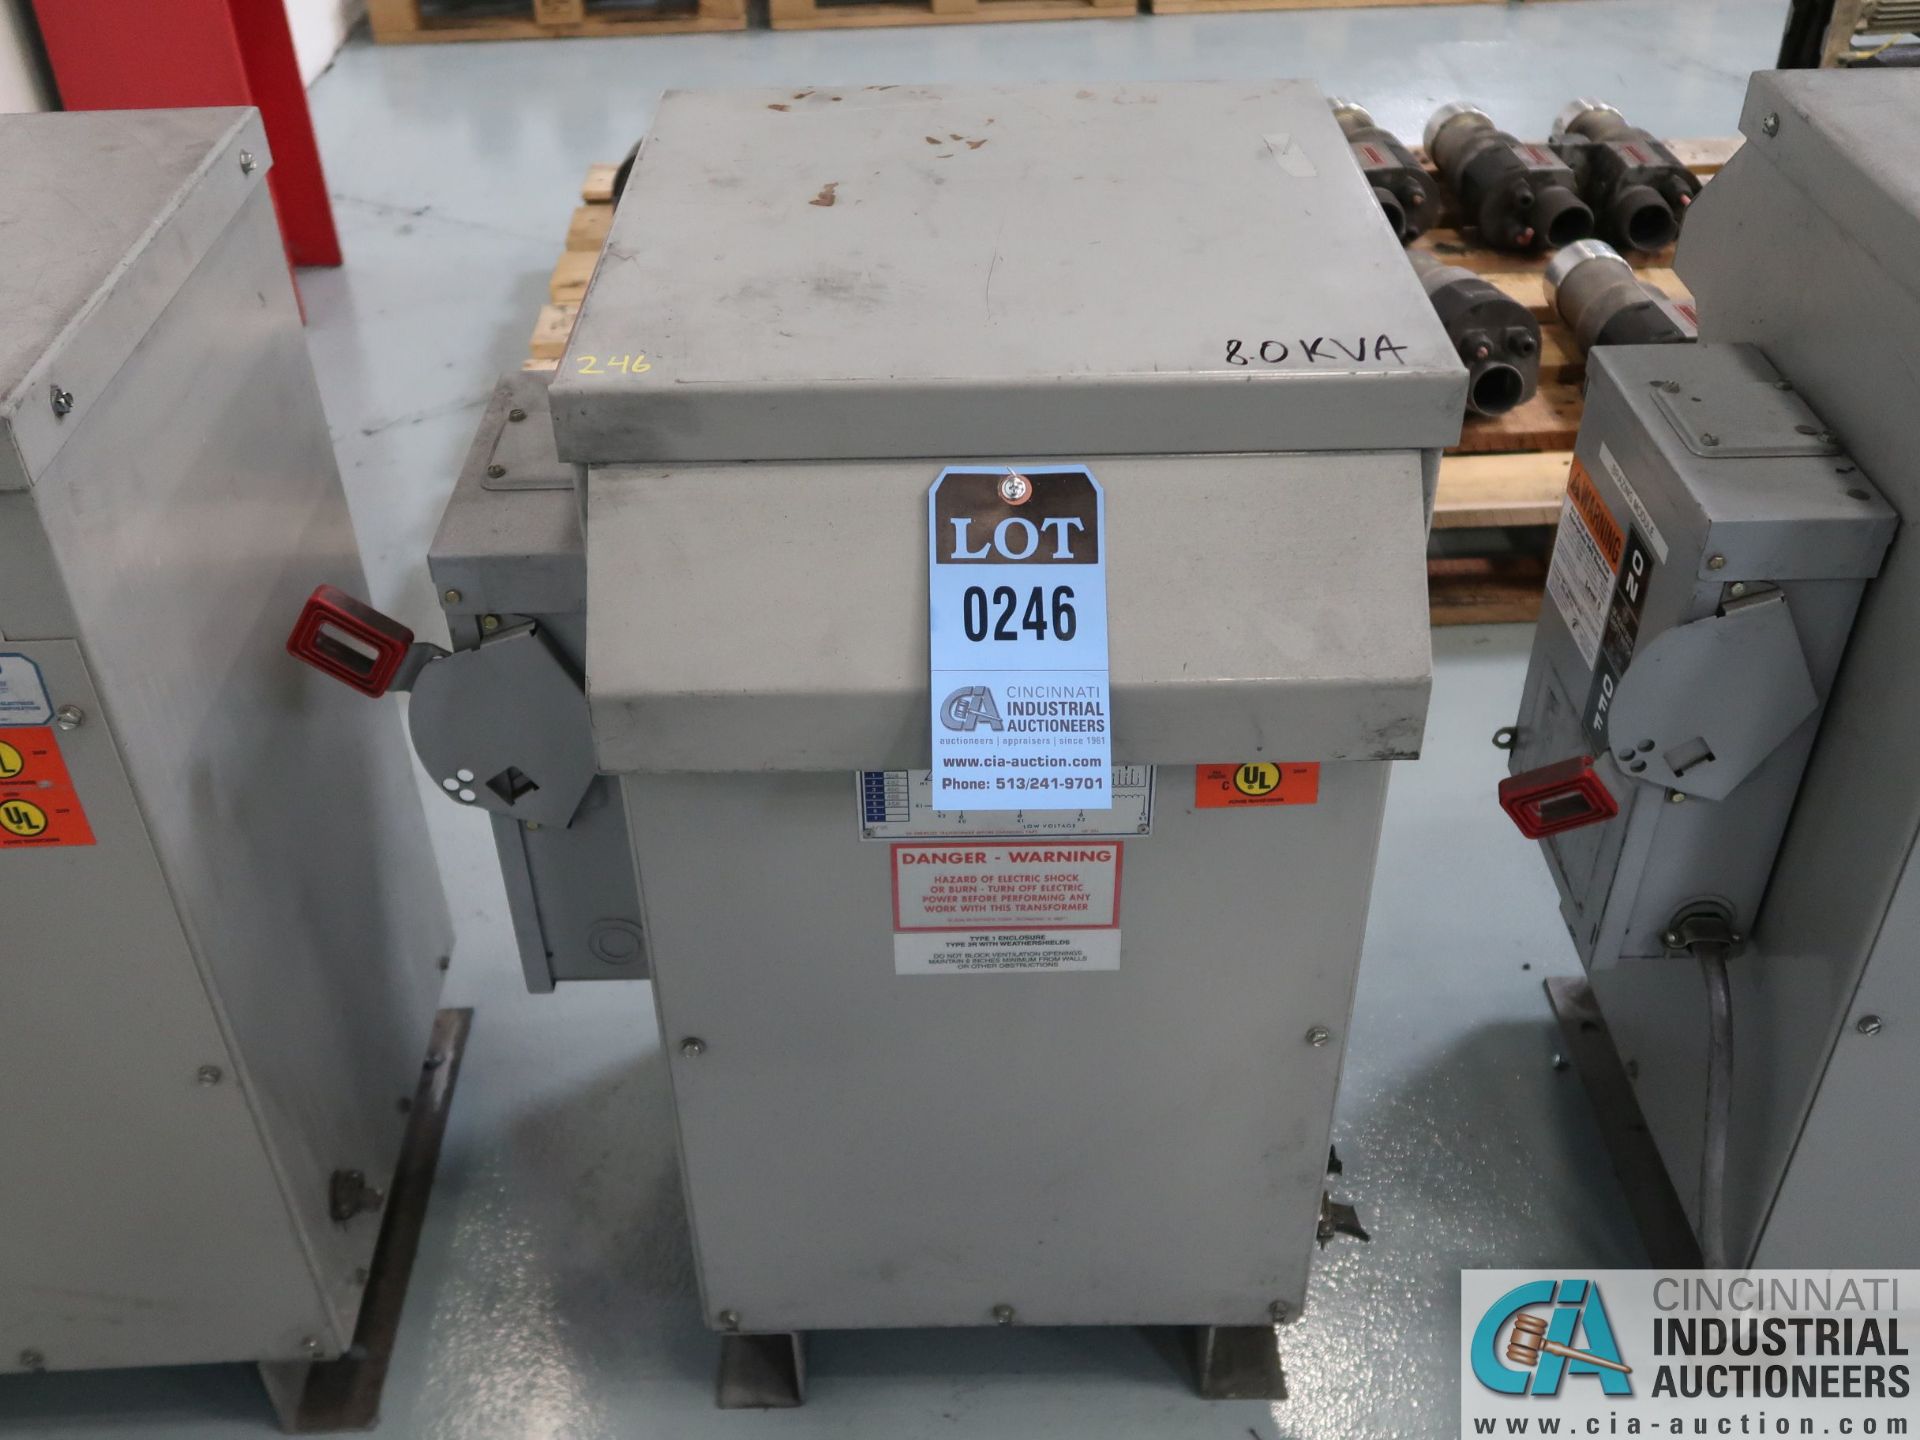 8.0 KVA OLSUN DRY TYPE TRANSFORMER *$25.00 RIGGING FEE DUE TO INDUSTRIAL SERVICES AND SALES*